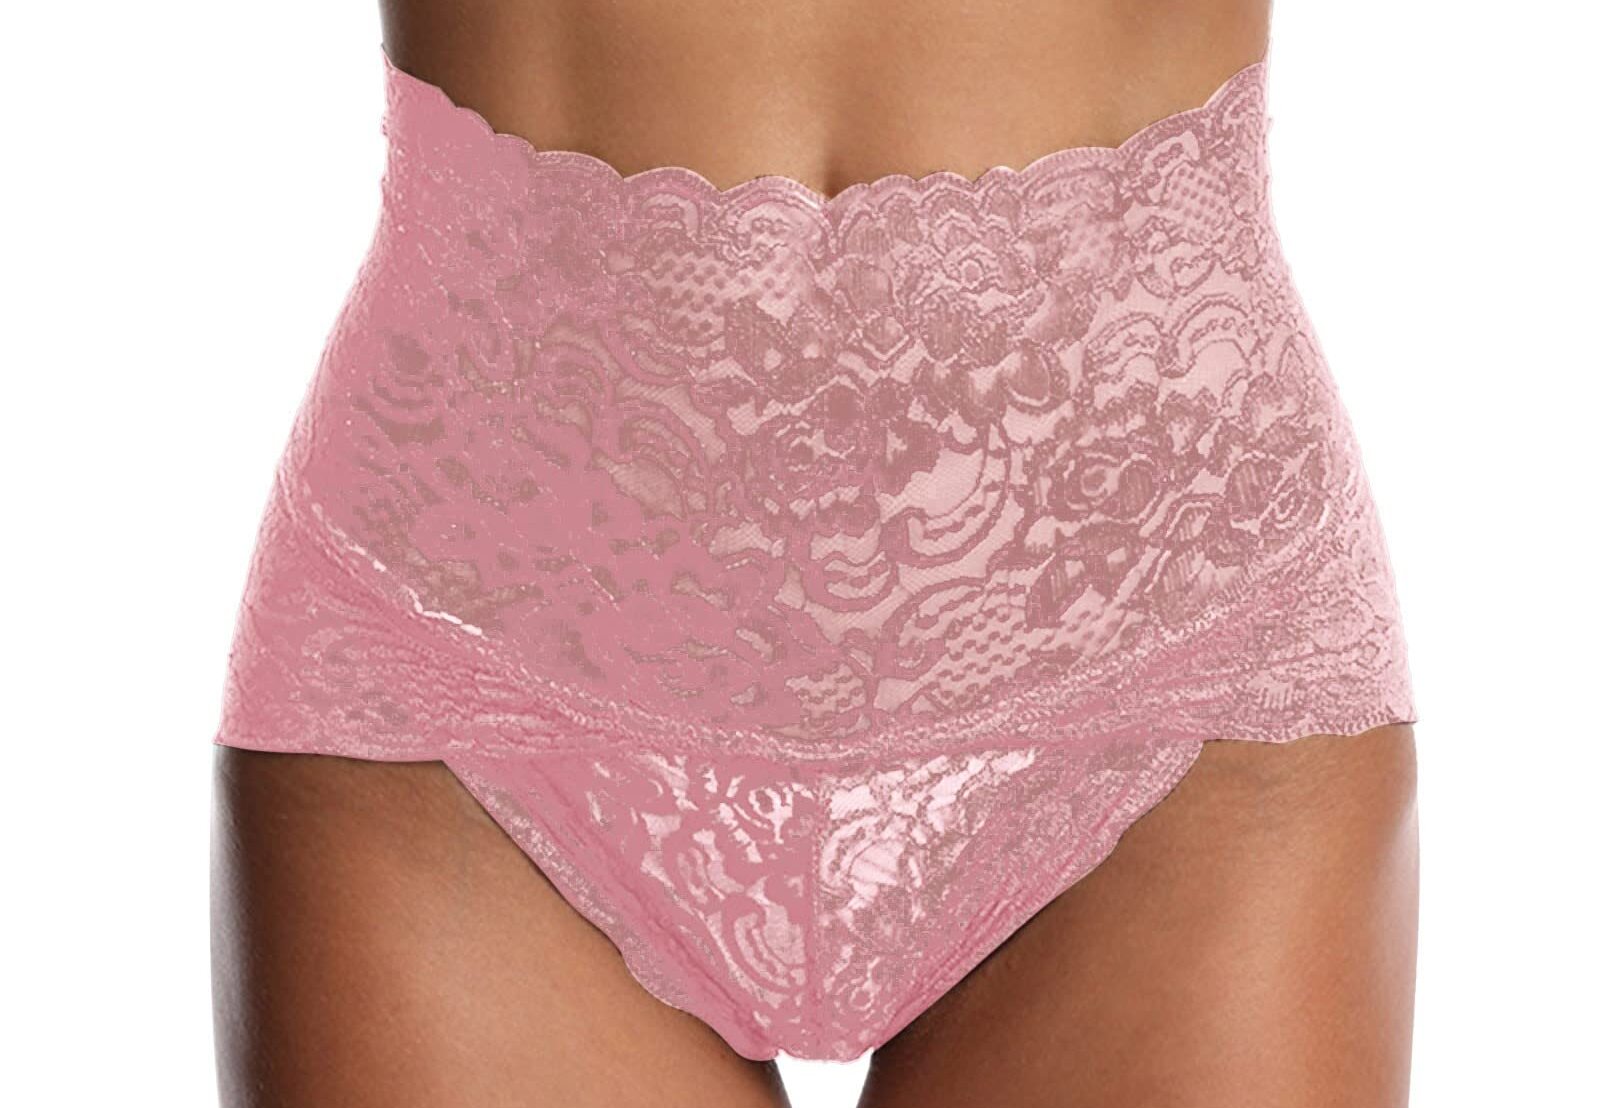 14 Amazing High Waisted Panties For Women for 2023